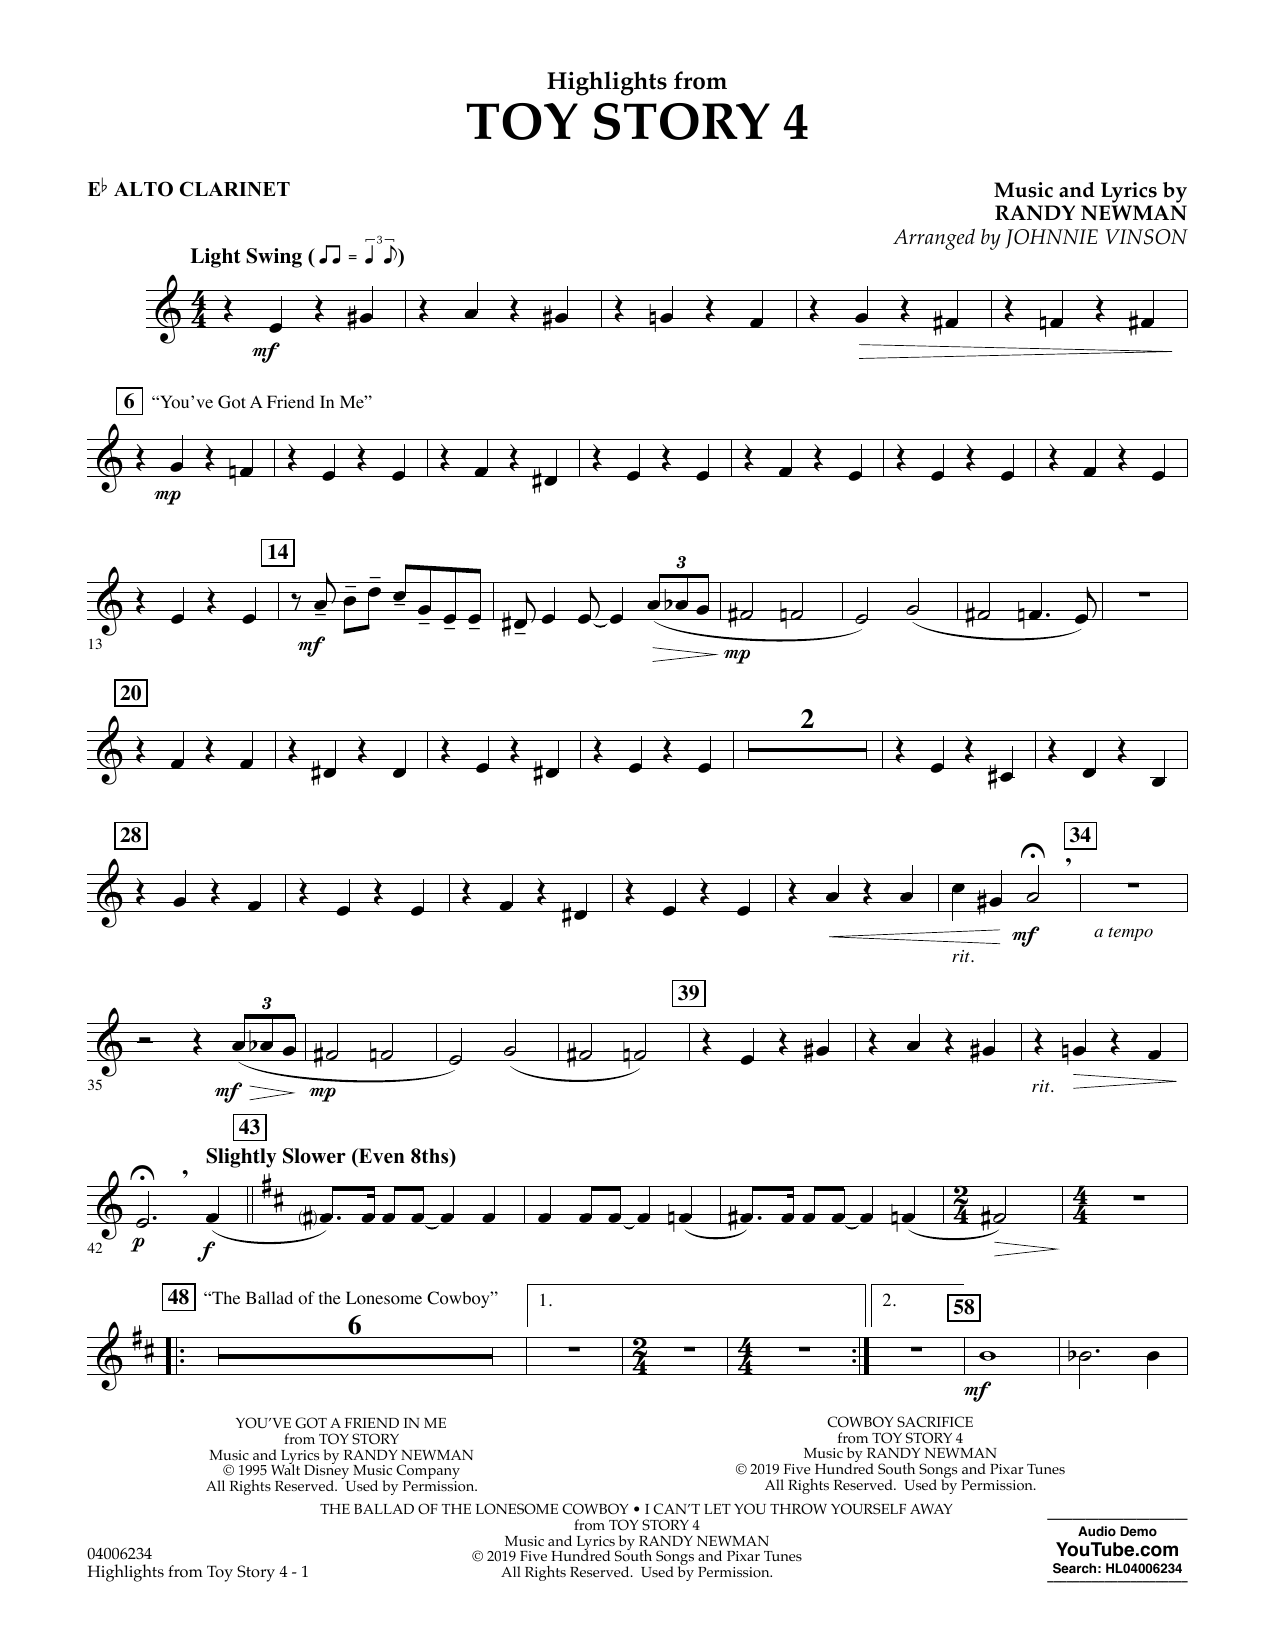 Randy Newman Highlights From Toy Story 4 Arr Johnnie Vinson Eb Alto Clarinet Sheet Music Download Pdf Score